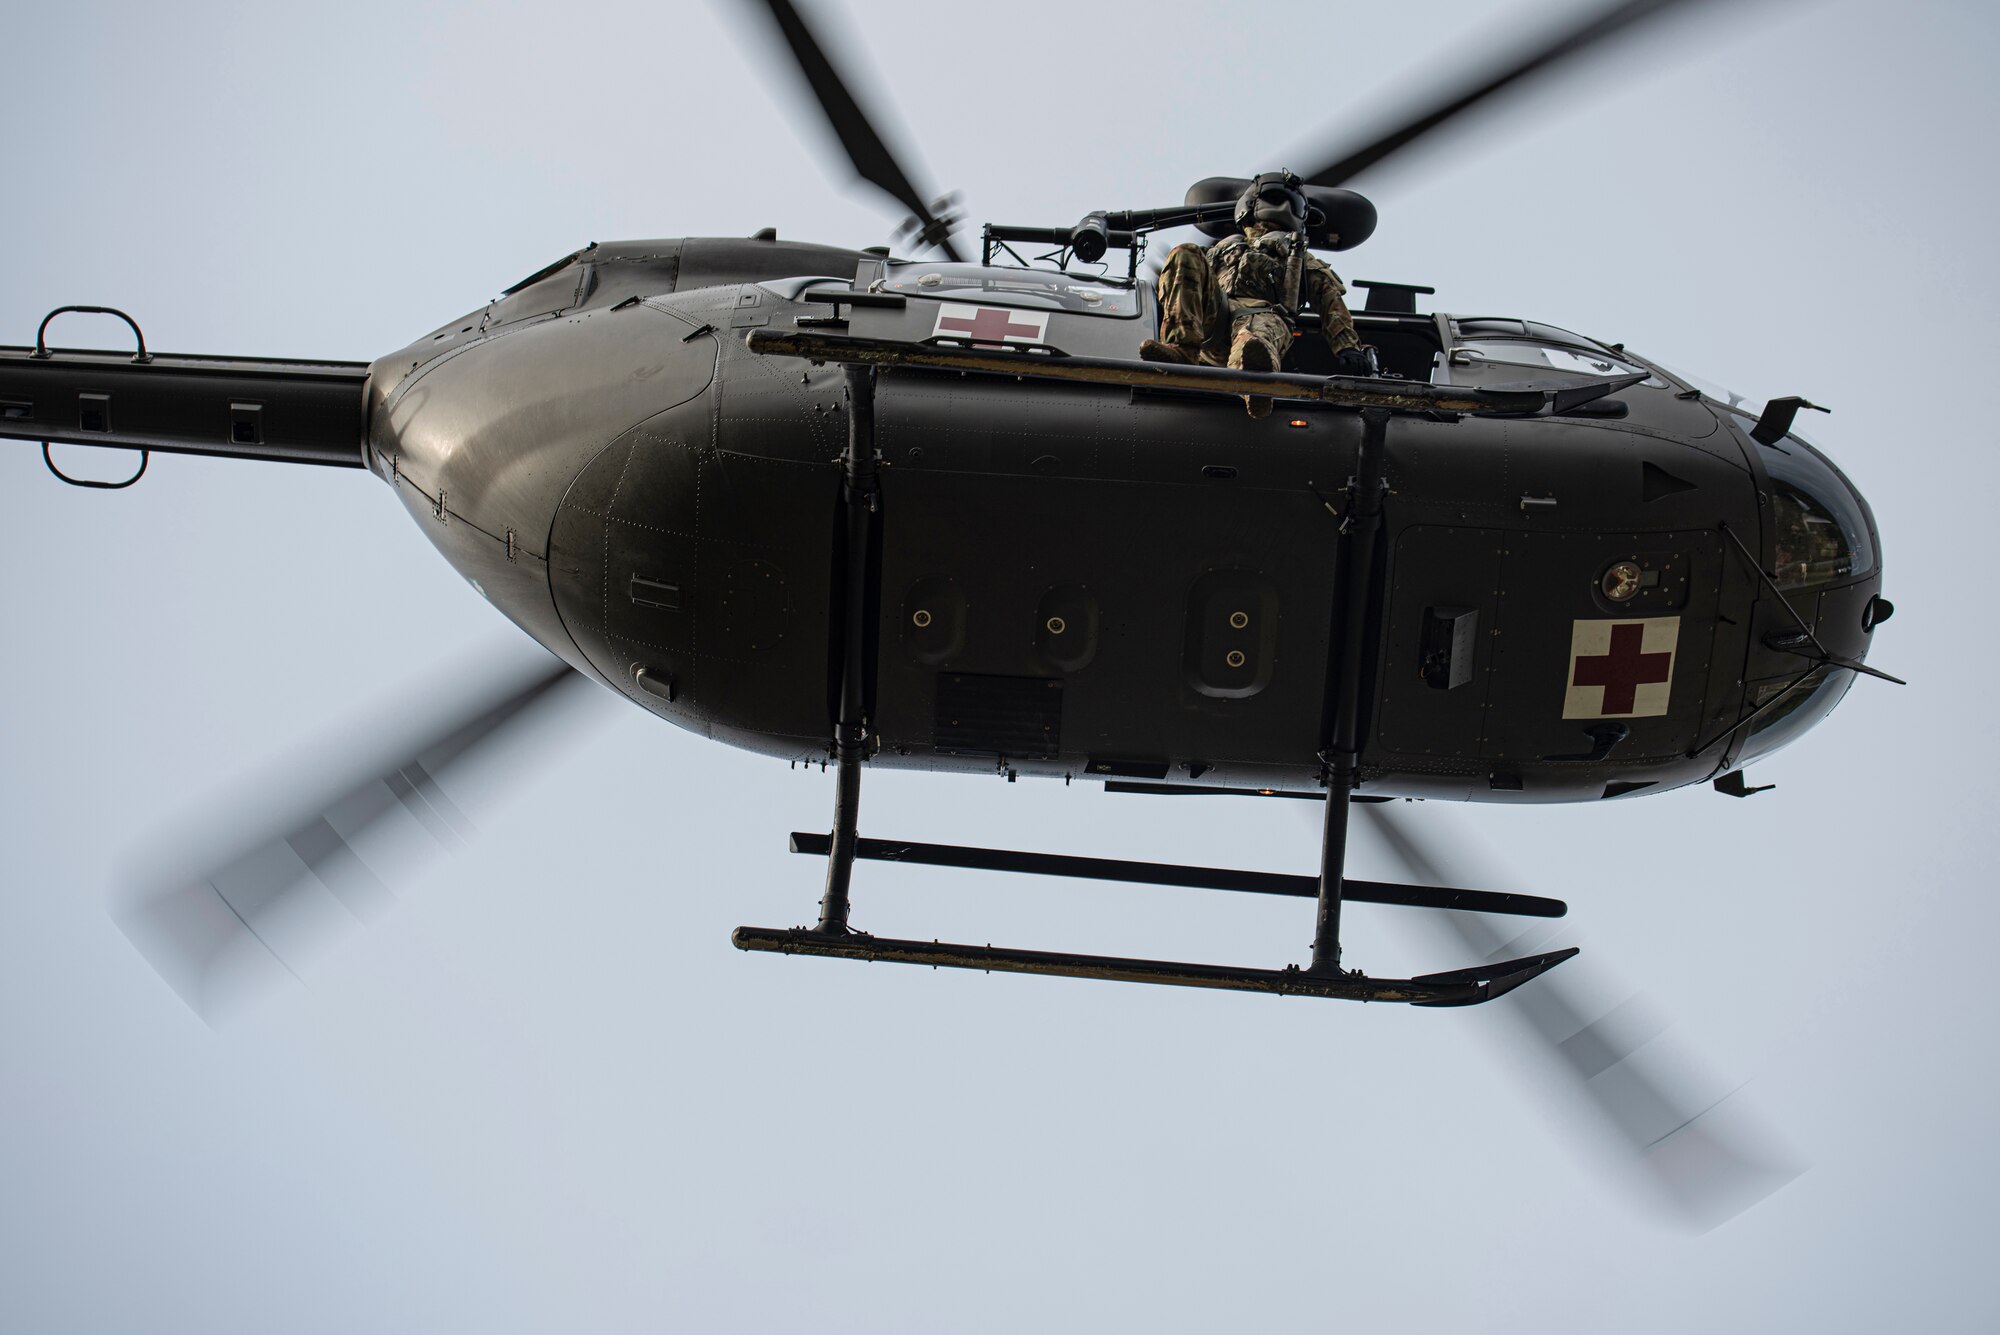 The Guam Army National Guard provided emergency airlift support for Exercise Dragon Shield at Northwest Field, Guam, January 13, 2021.